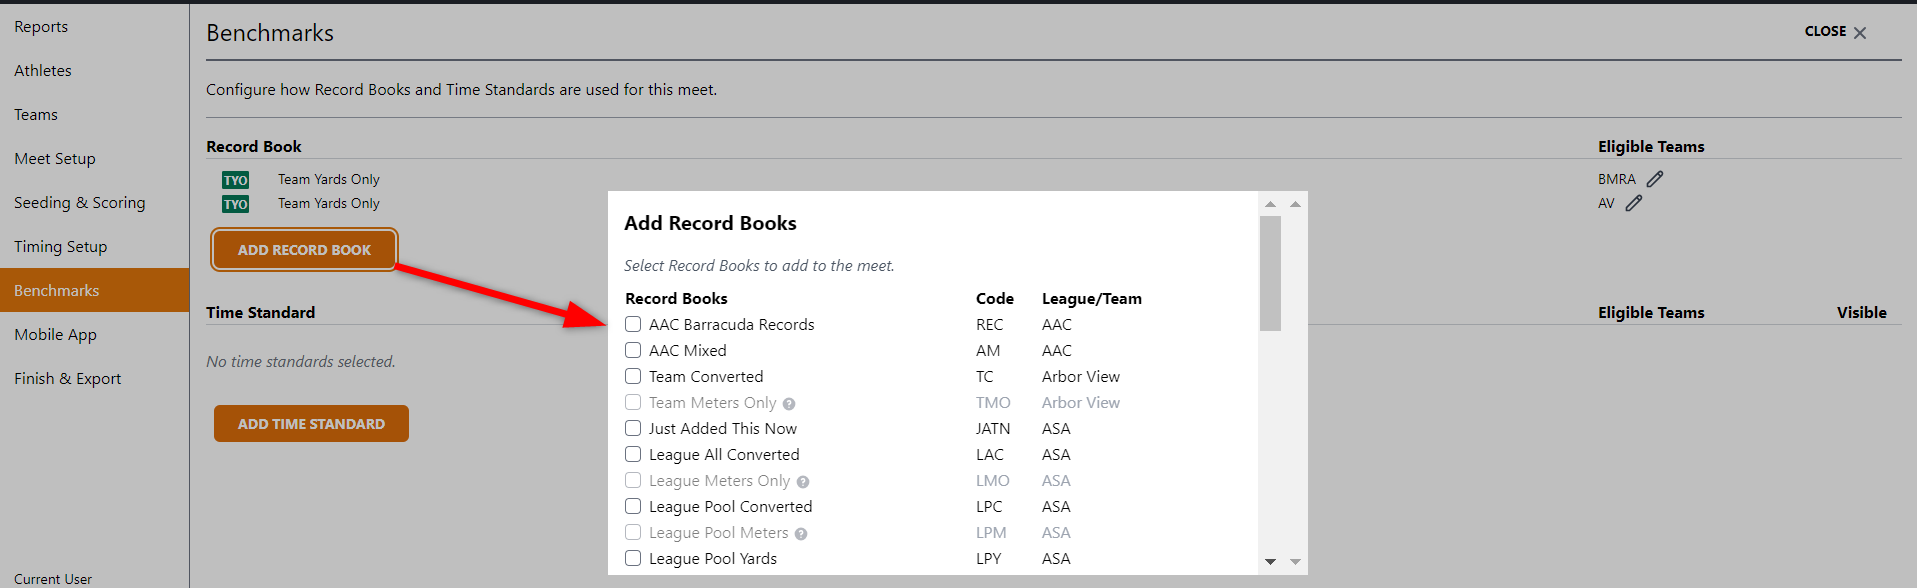 ADD_RECORD_BOOKS.png